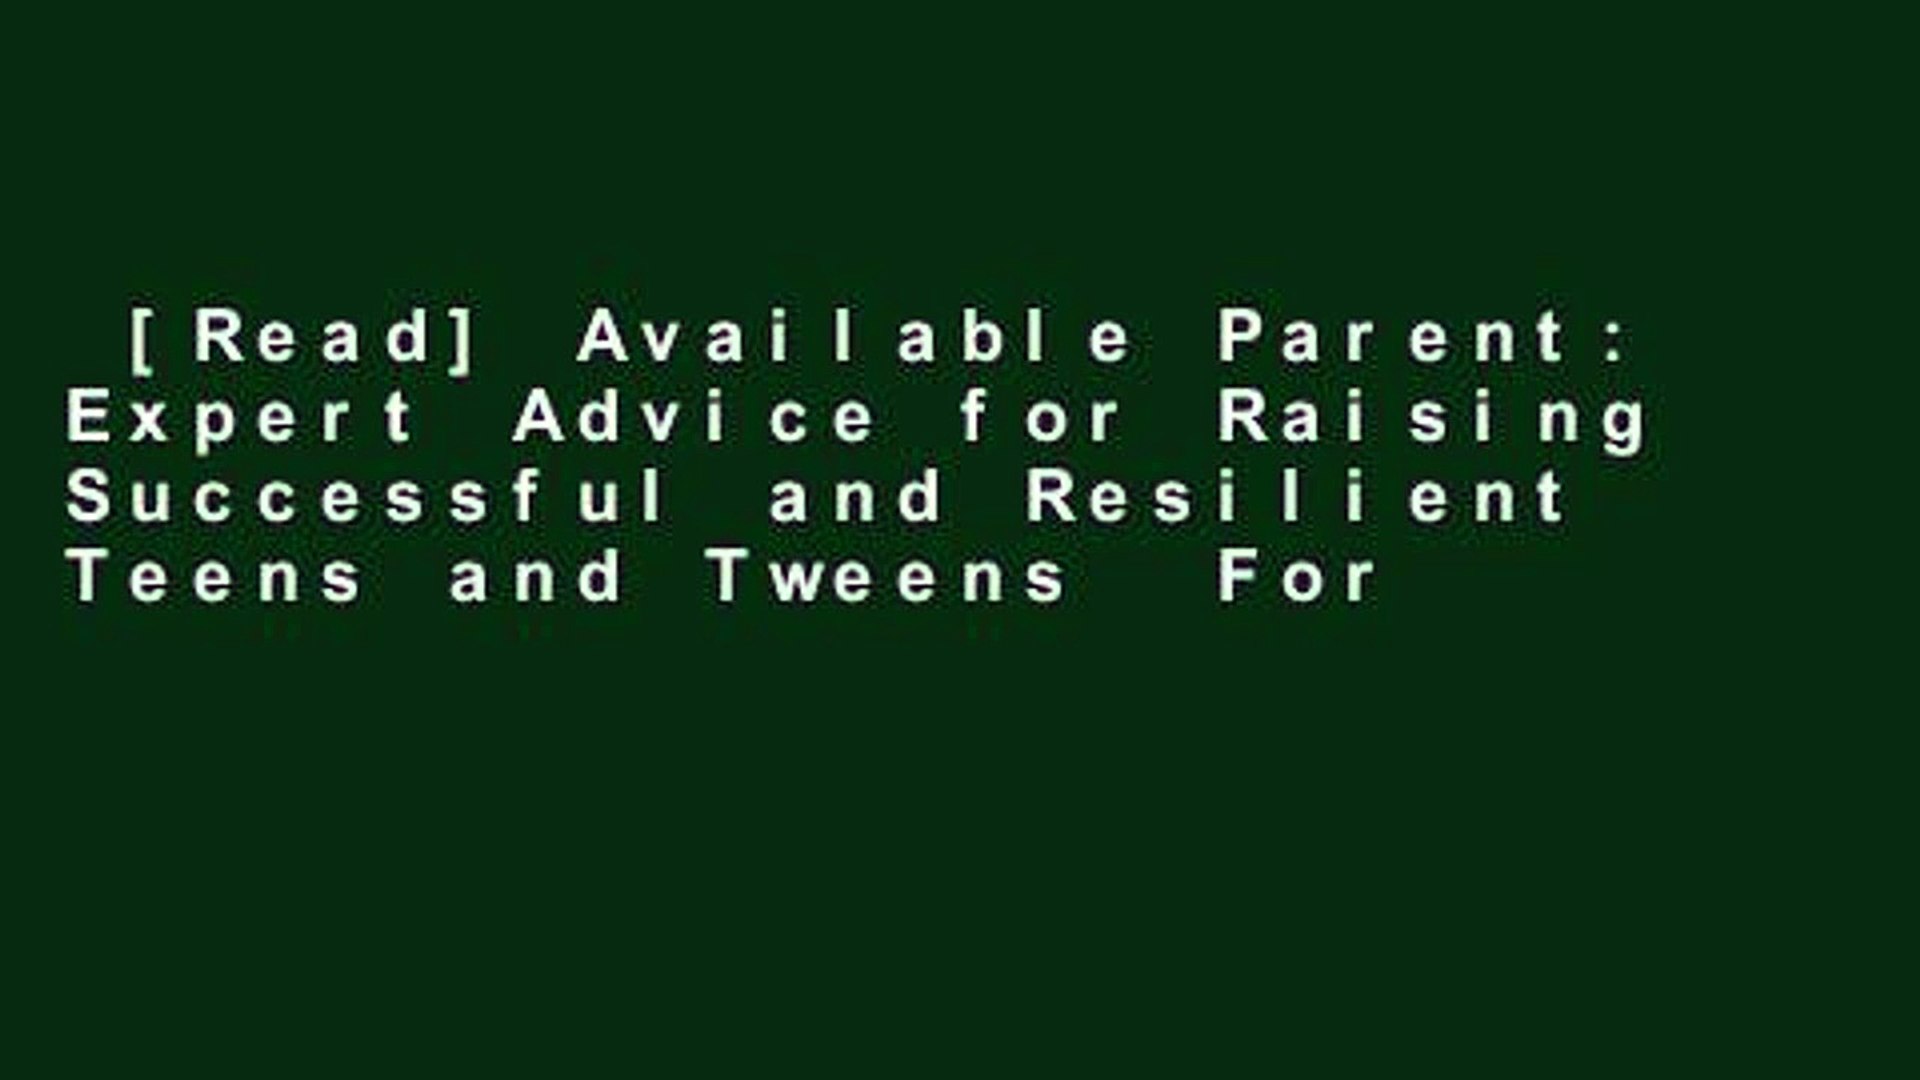 The Available Parent Expert Advice for Raising Successful and Resilient Teens and Tweens 